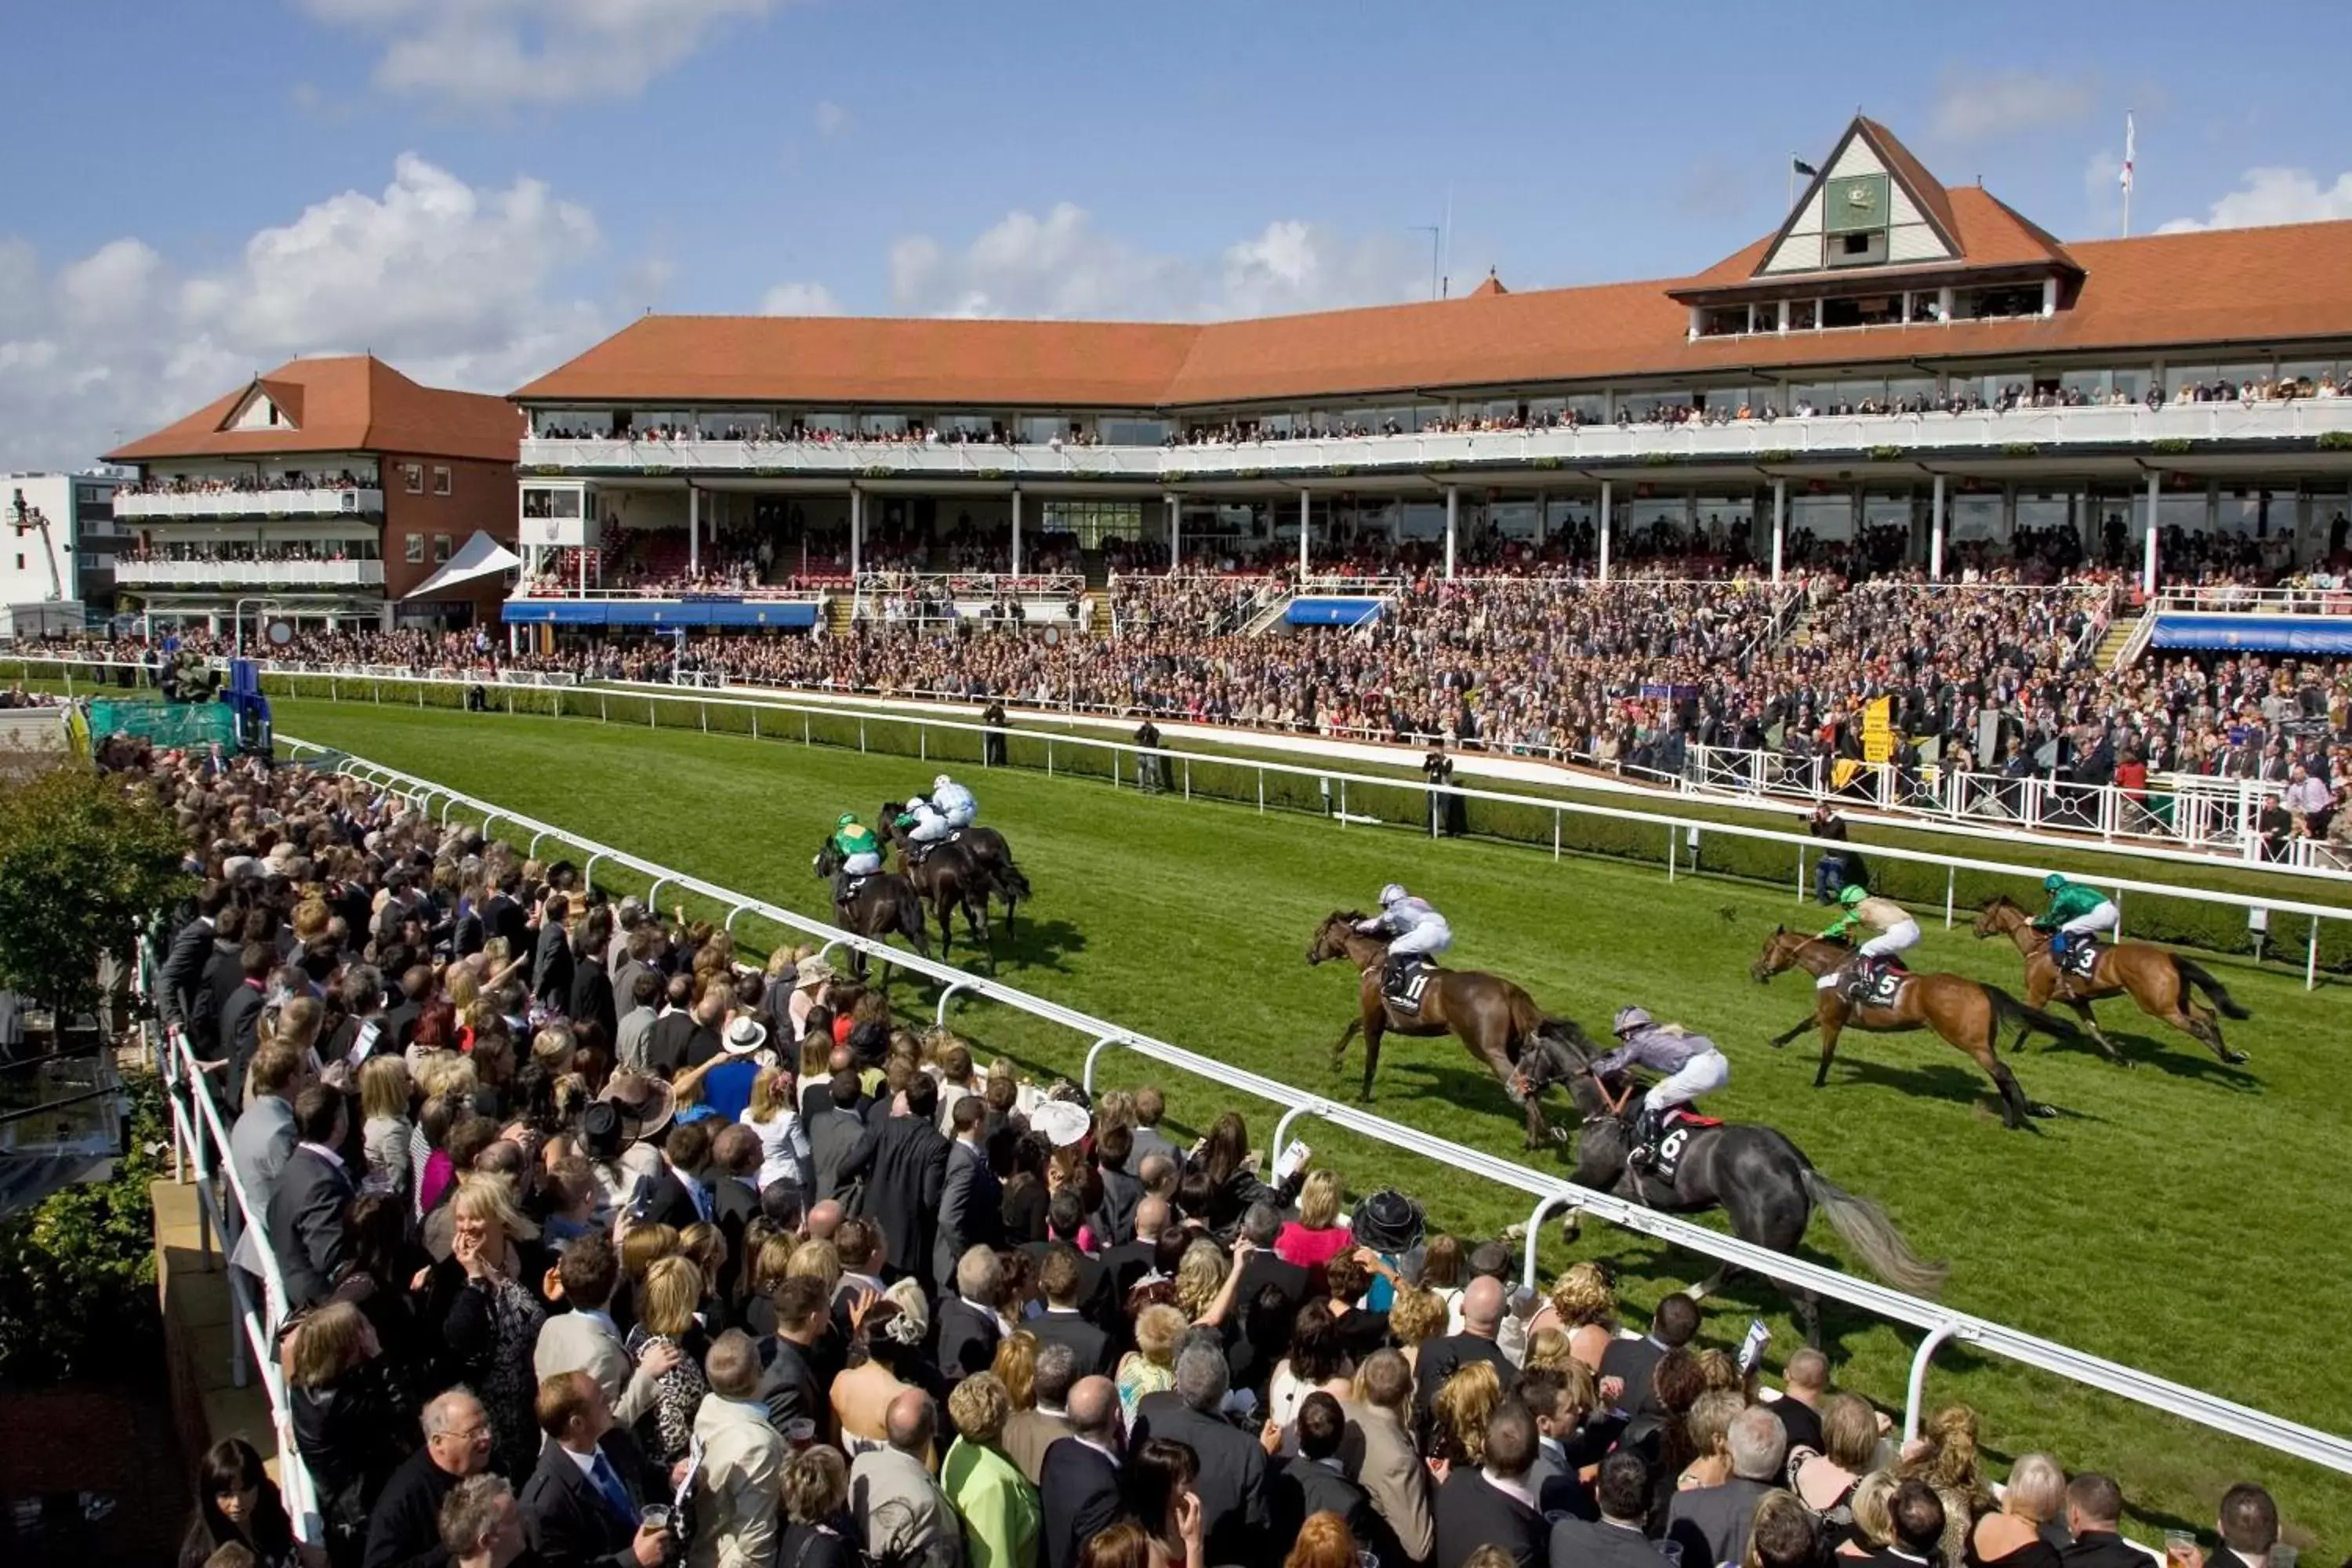 Area and facilities, Other Activities in Holiday Inn Express Chester Racecourse